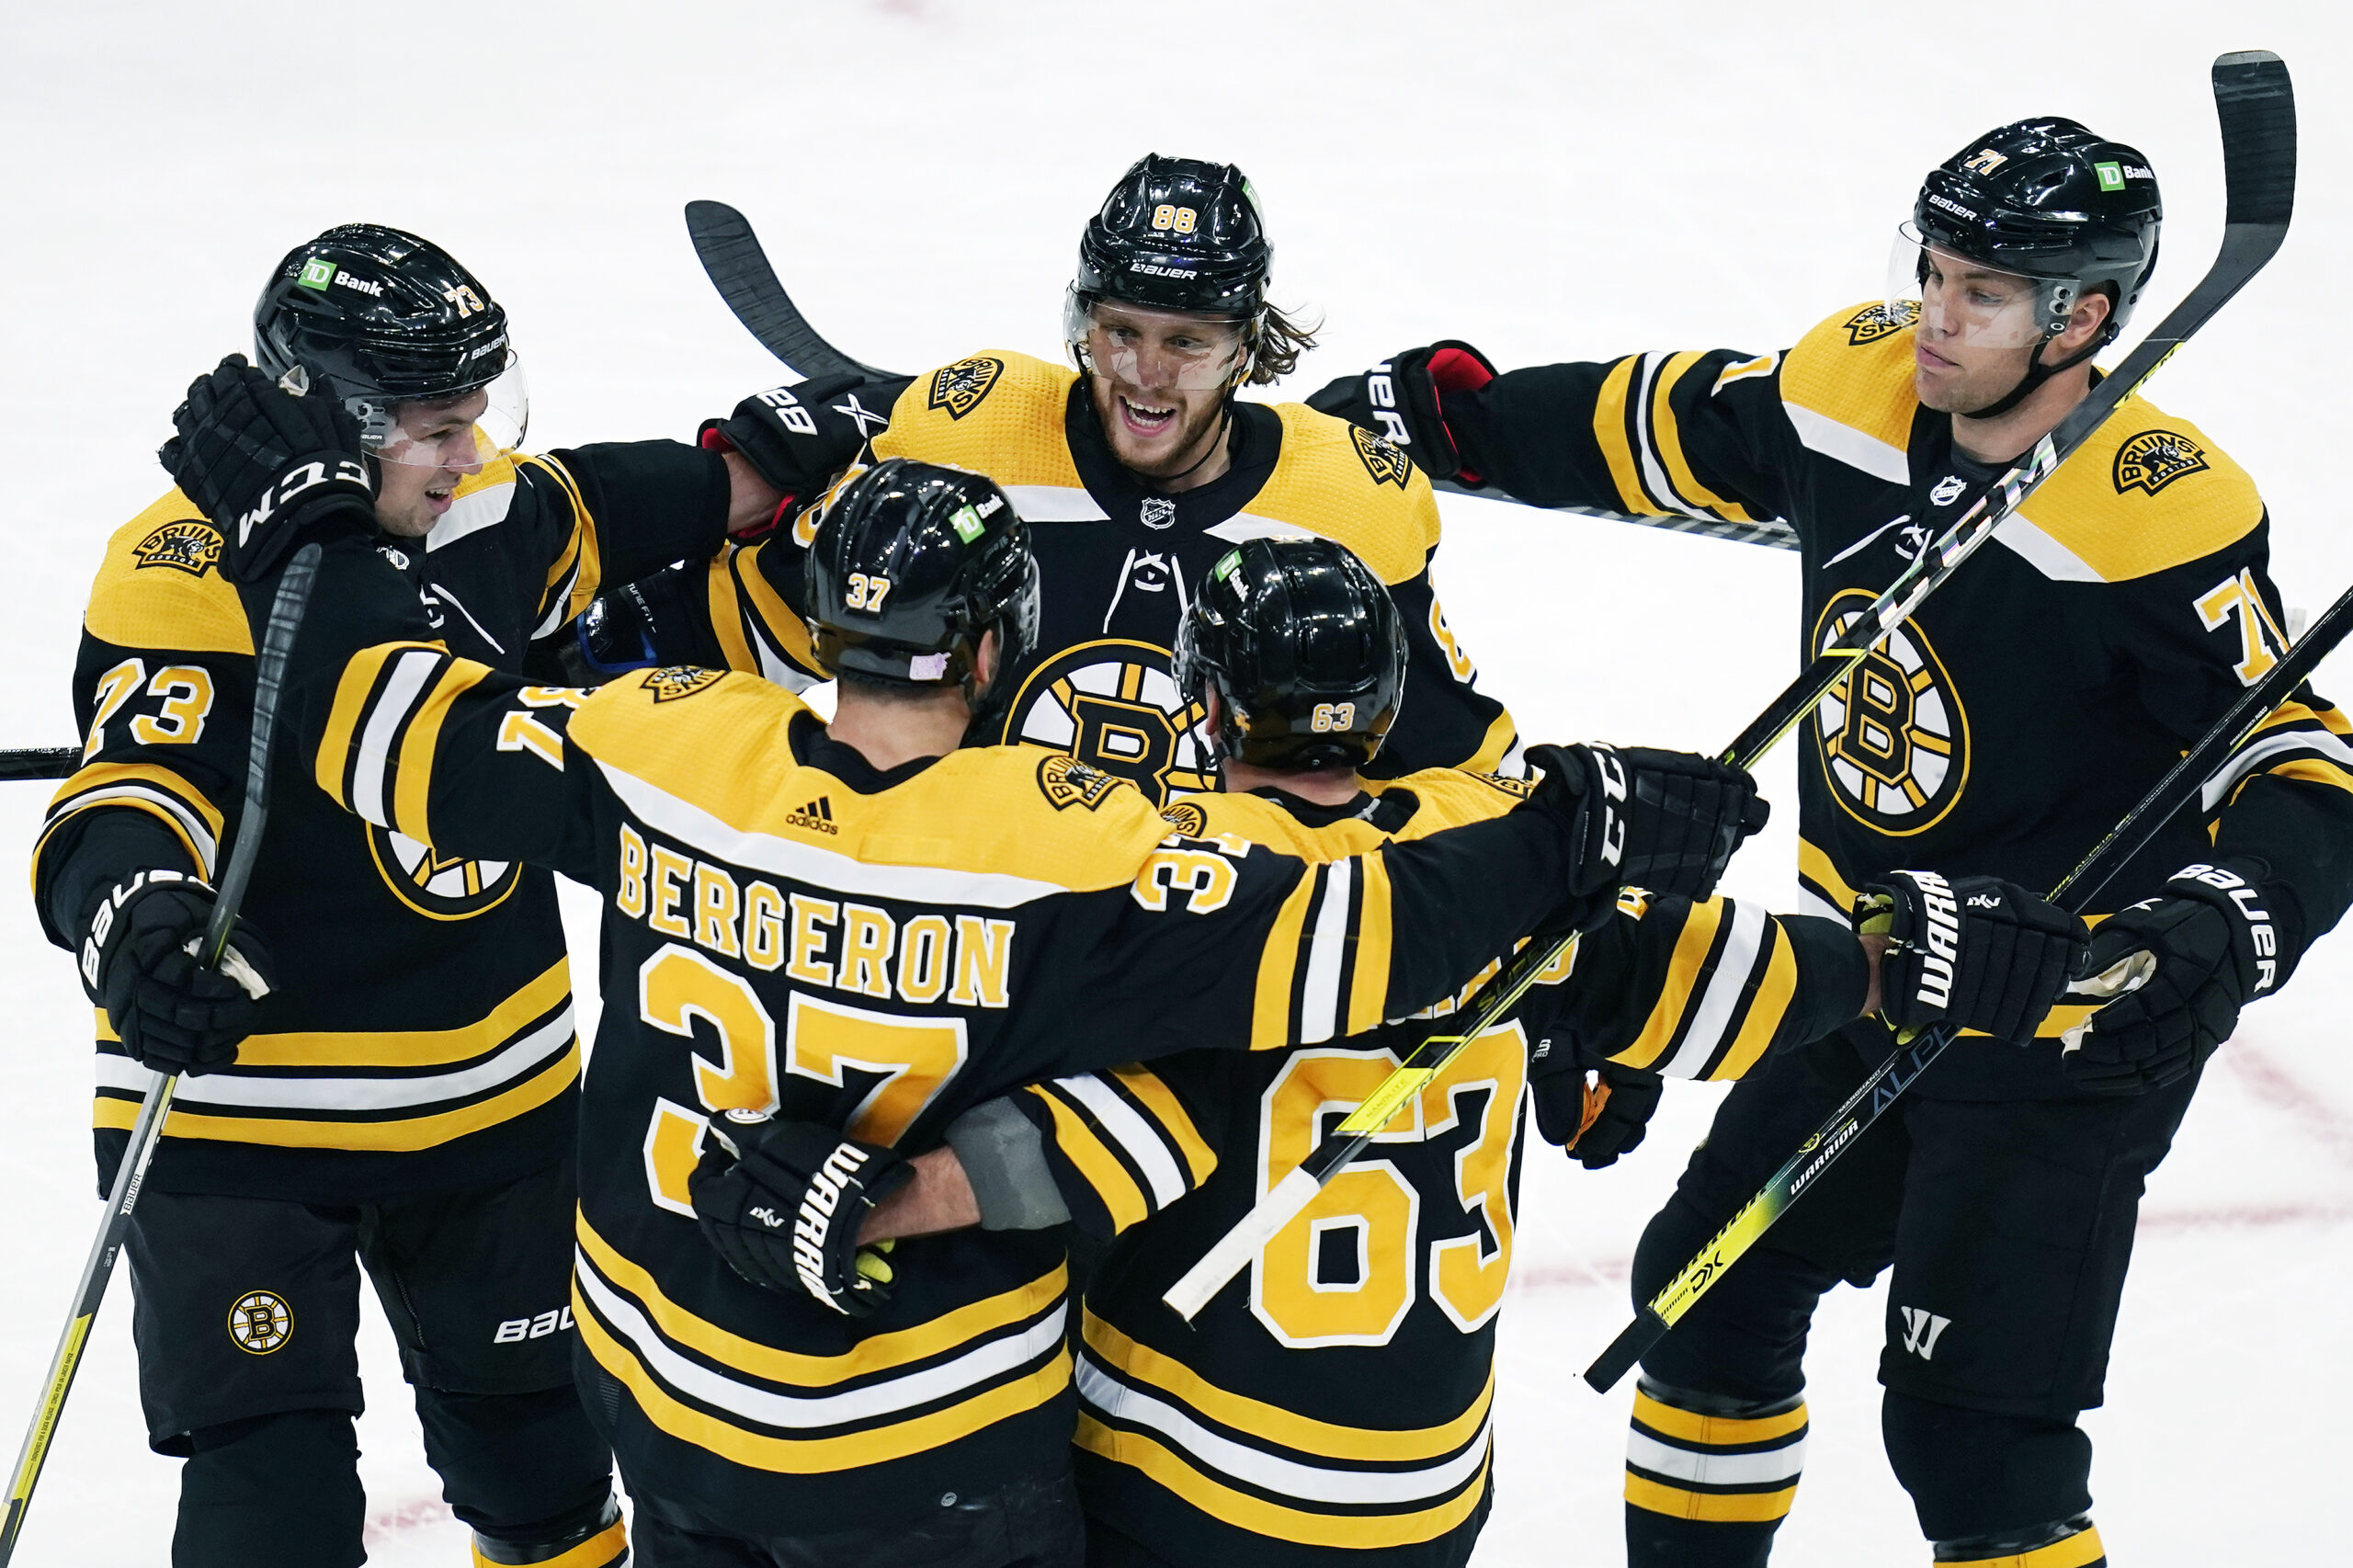 Patrice Bergeron completes the hat trick and scores career goal